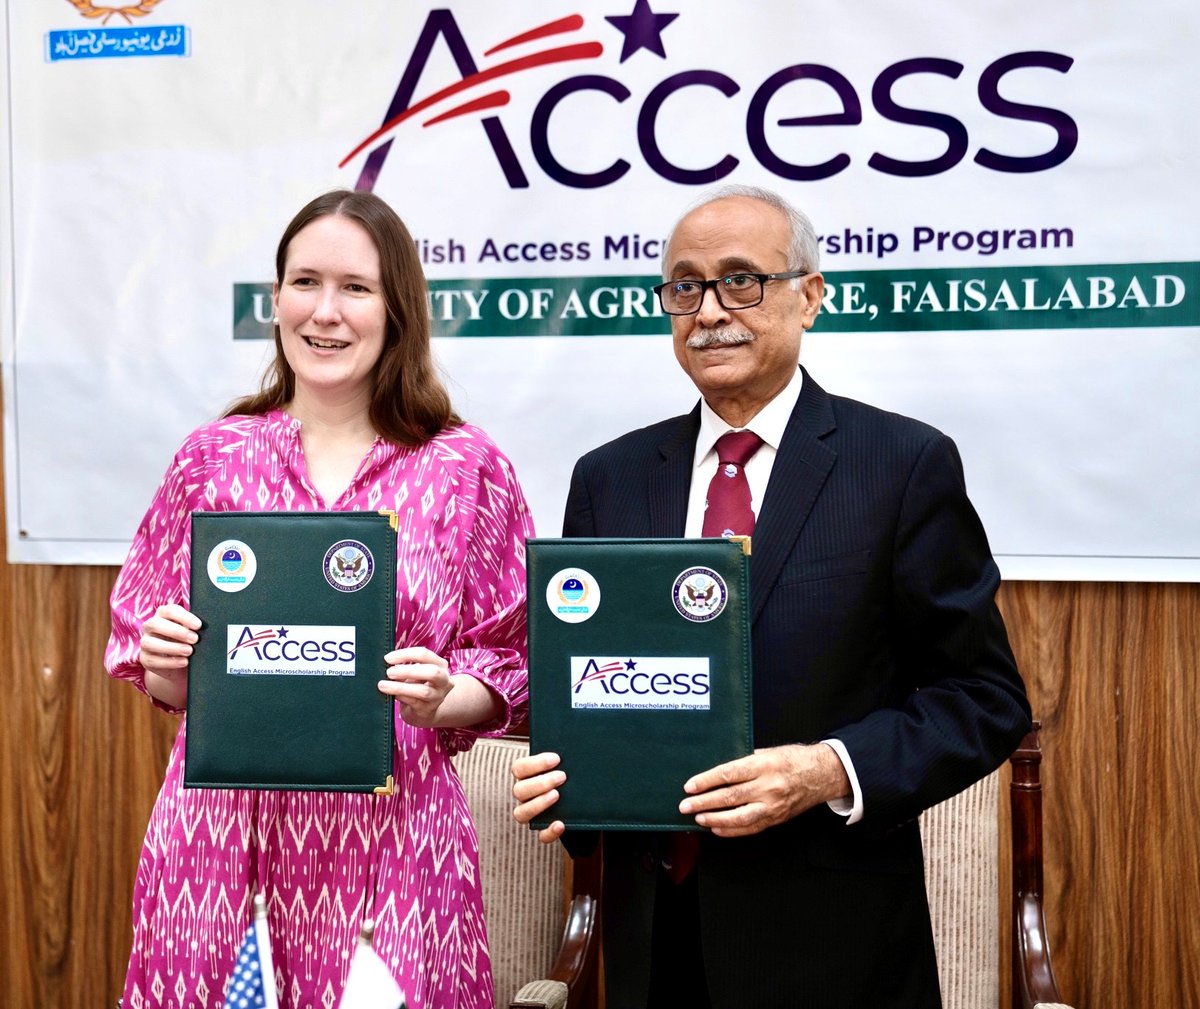 Exciting news! @UniversityofAg2 , Faisalabad signed an agreement for a new cohort of 200 students to participate in our English Access Program.